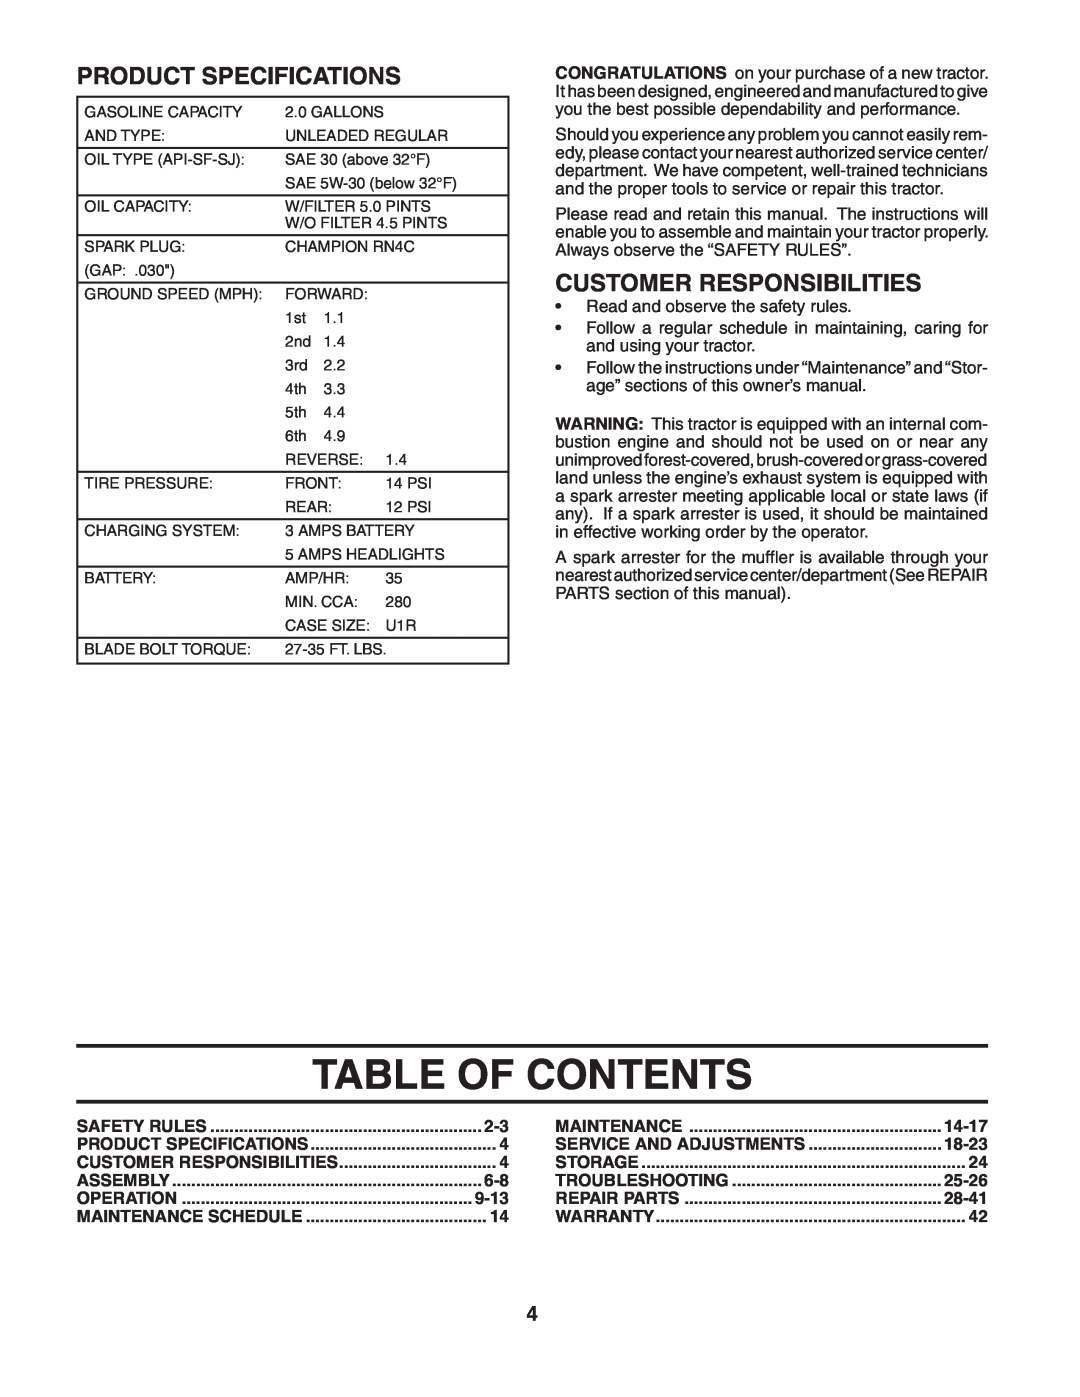 Weed Eater WET2242STA manual Table Of Contents, Product Specifications, Customer Responsibilities 